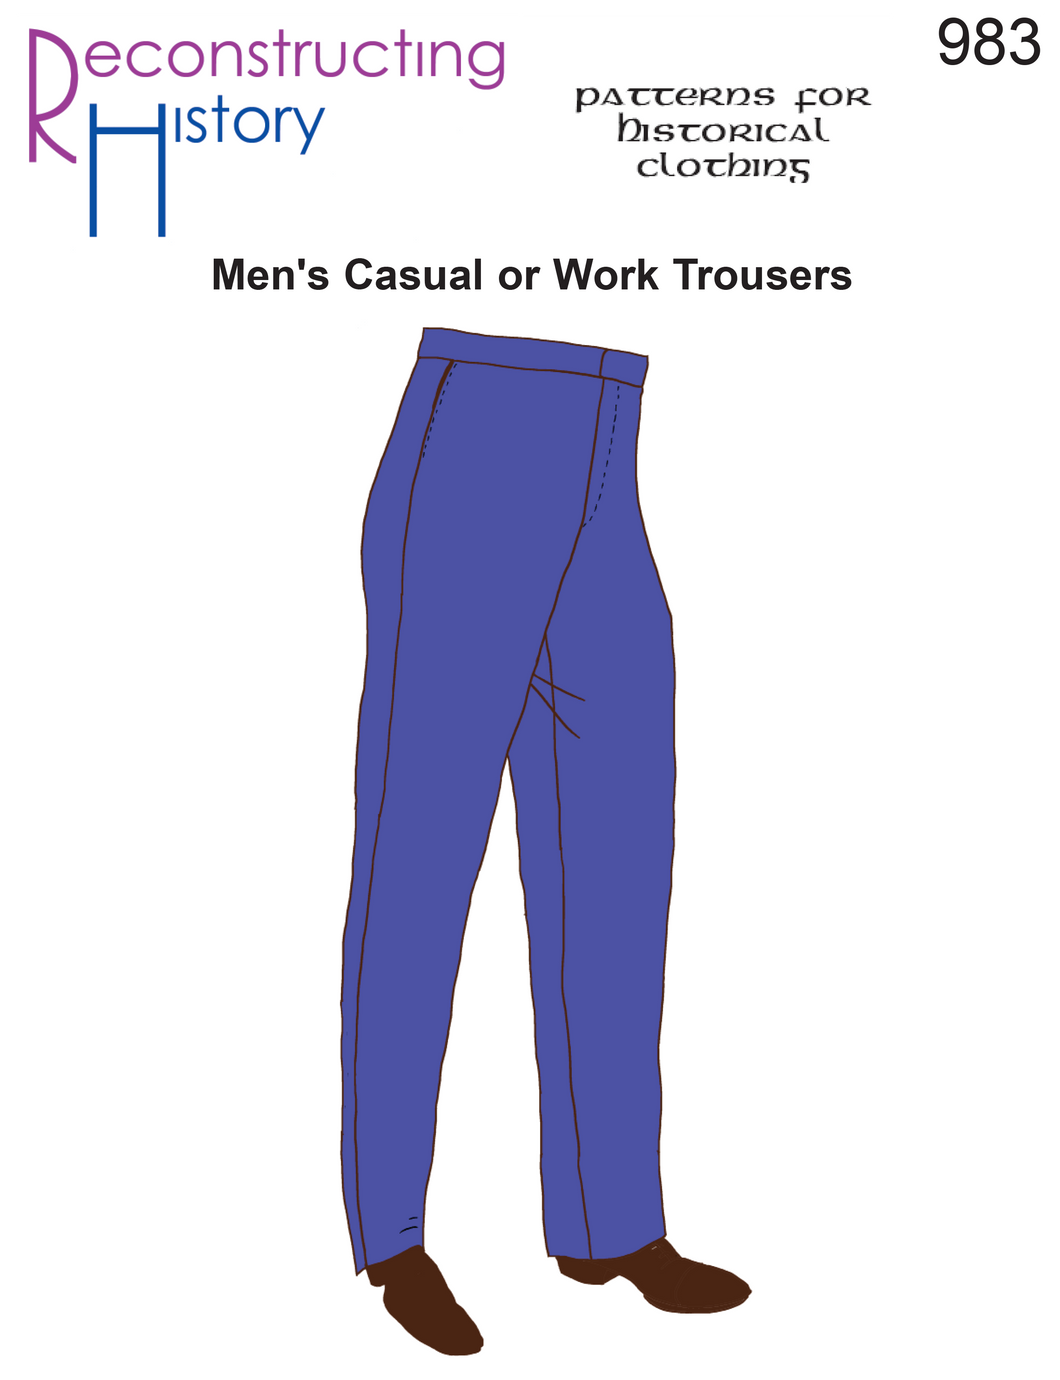 RH983 — Men's Casual or Work Trousers sewing pattern